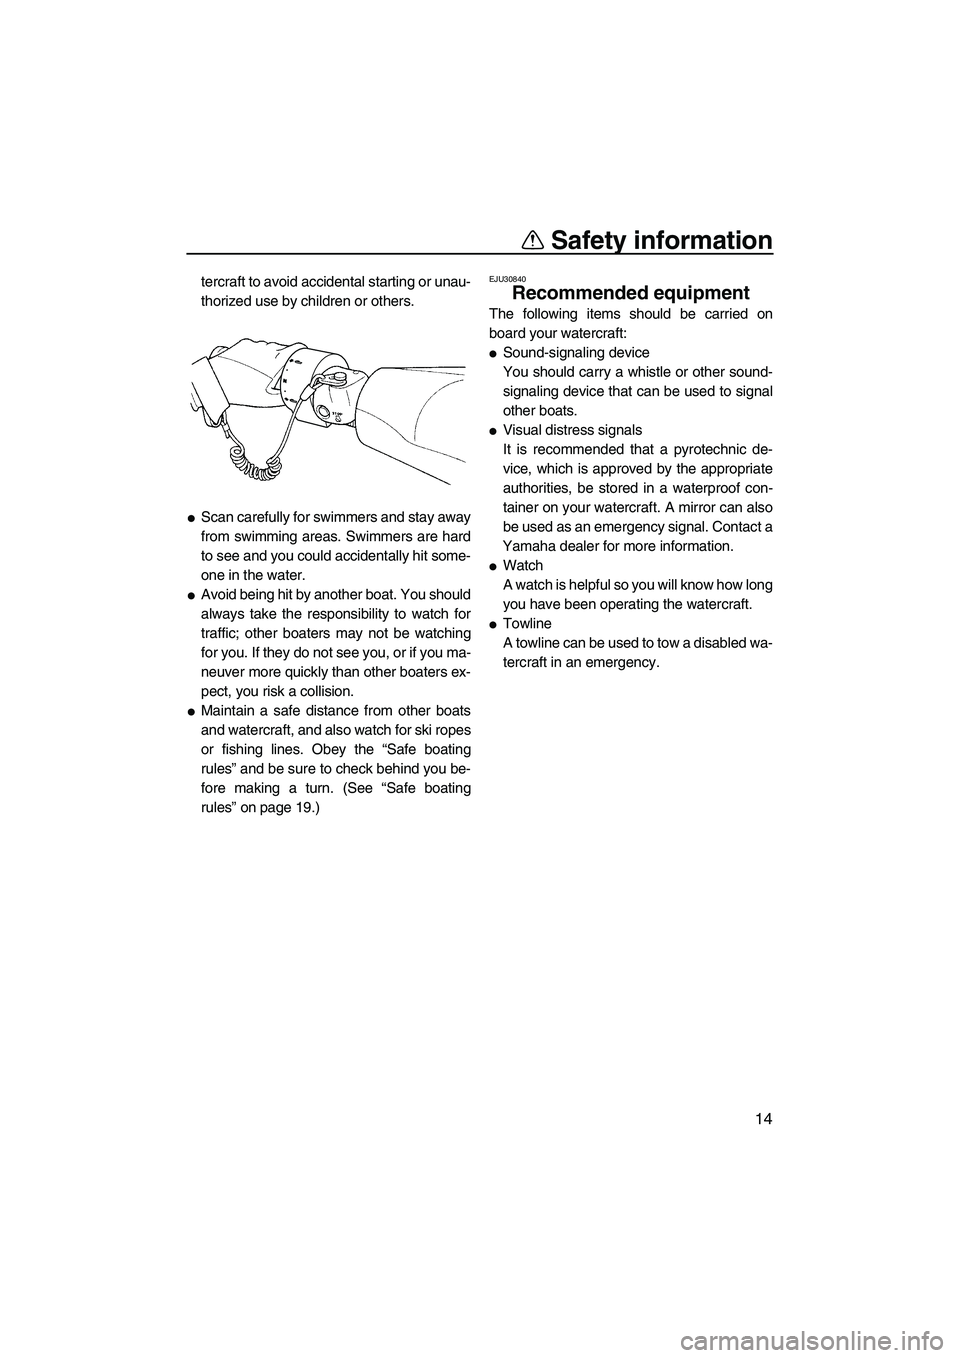 YAMAHA FX HO 2010  Owners Manual Safety information
14
tercraft to avoid accidental starting or unau-
thorized use by children or others.
Scan carefully for swimmers and stay away
from swimming areas. Swimmers are hard
to see and yo